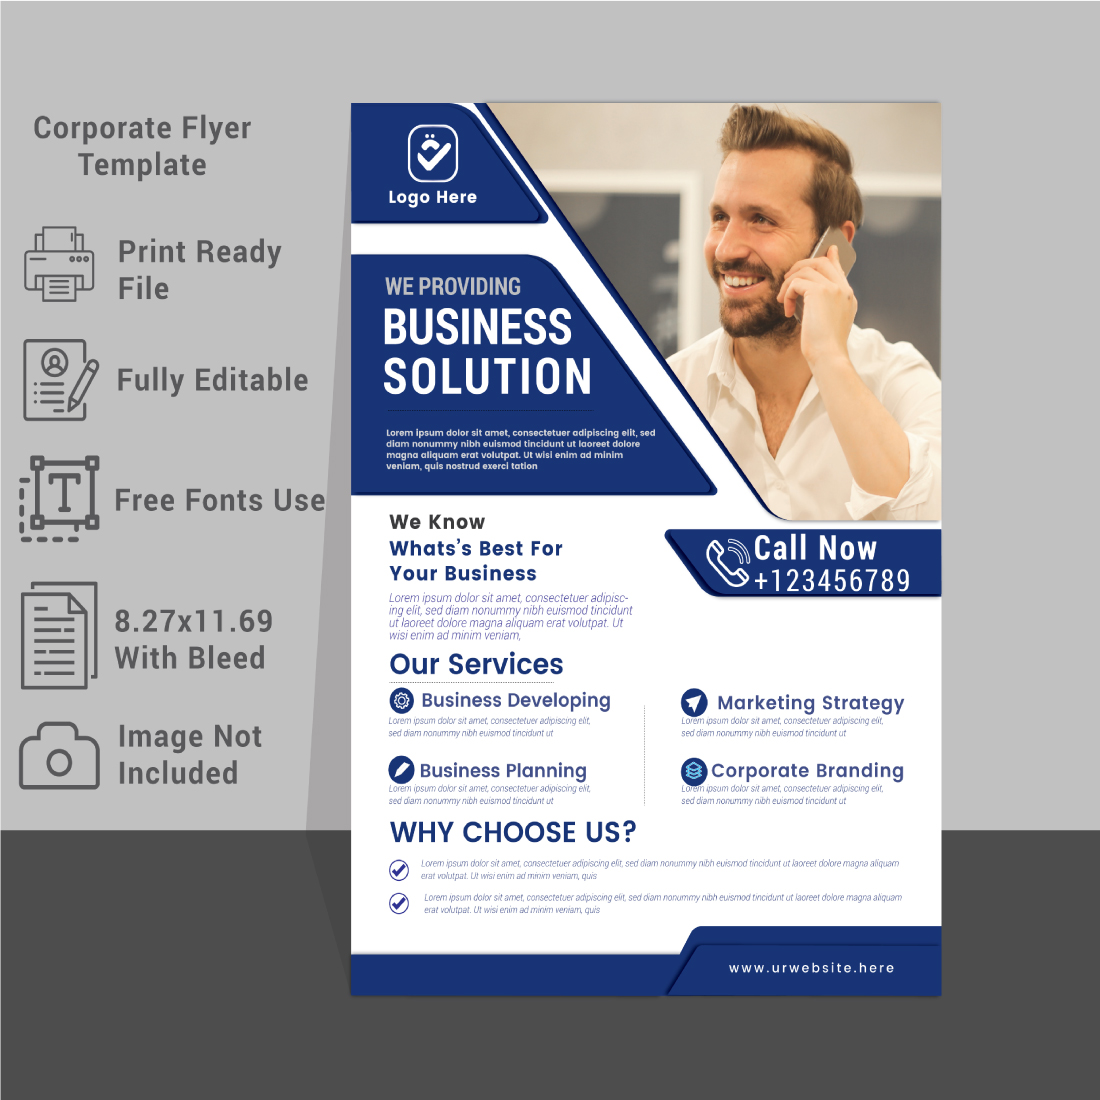 Print ready flyer TemplateCorporate Flyer Template for your business cover image.